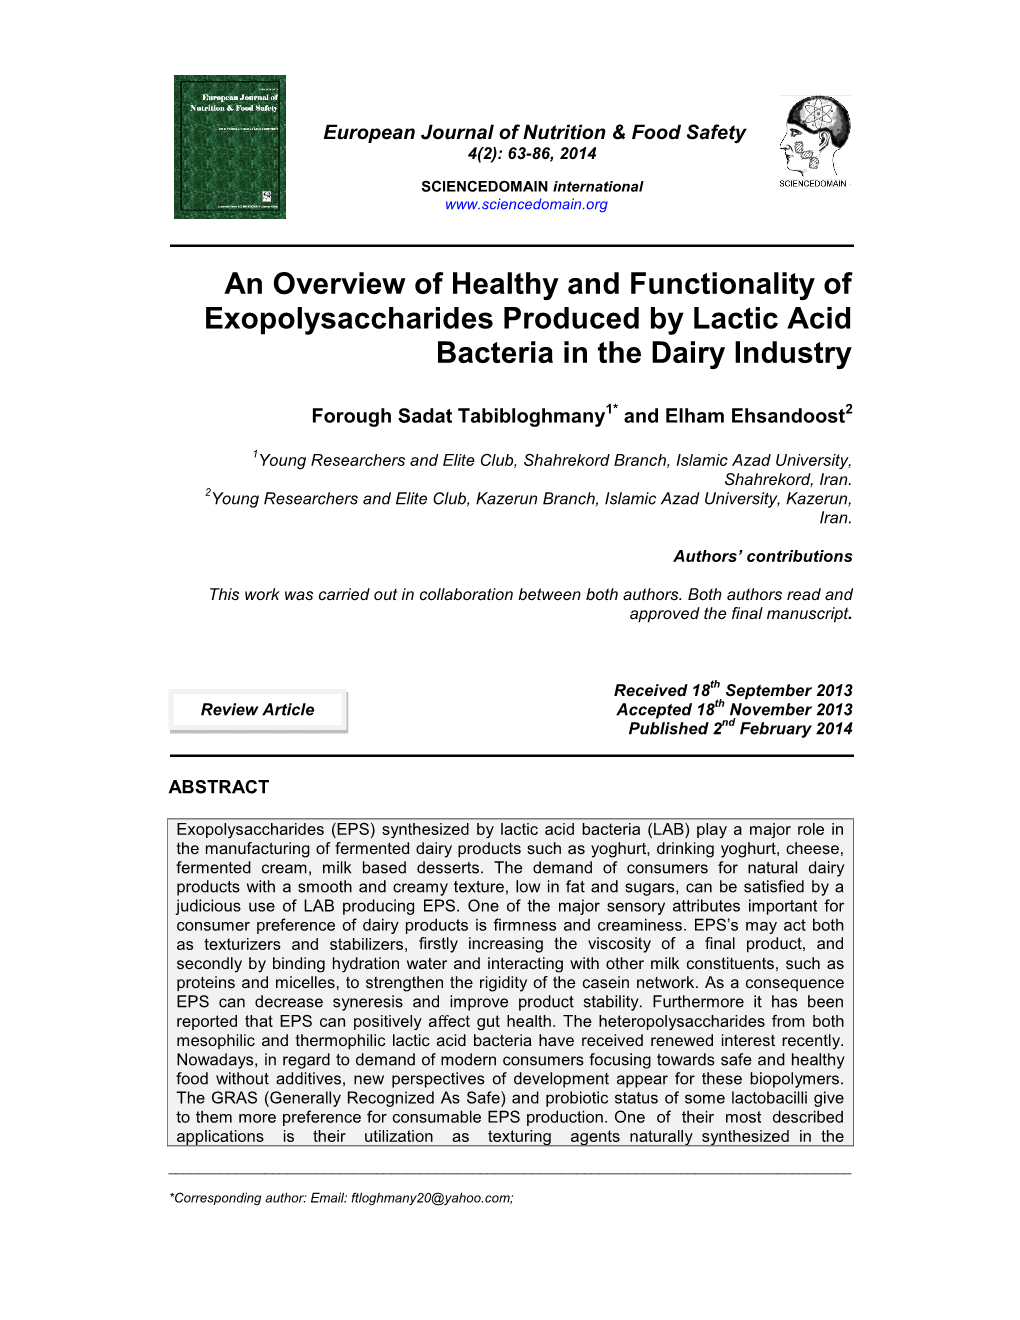 An Overview of Healthy and Functionality of Exopolysaccharides Produced by Lactic Acid Bacteria in the Dairy Industry